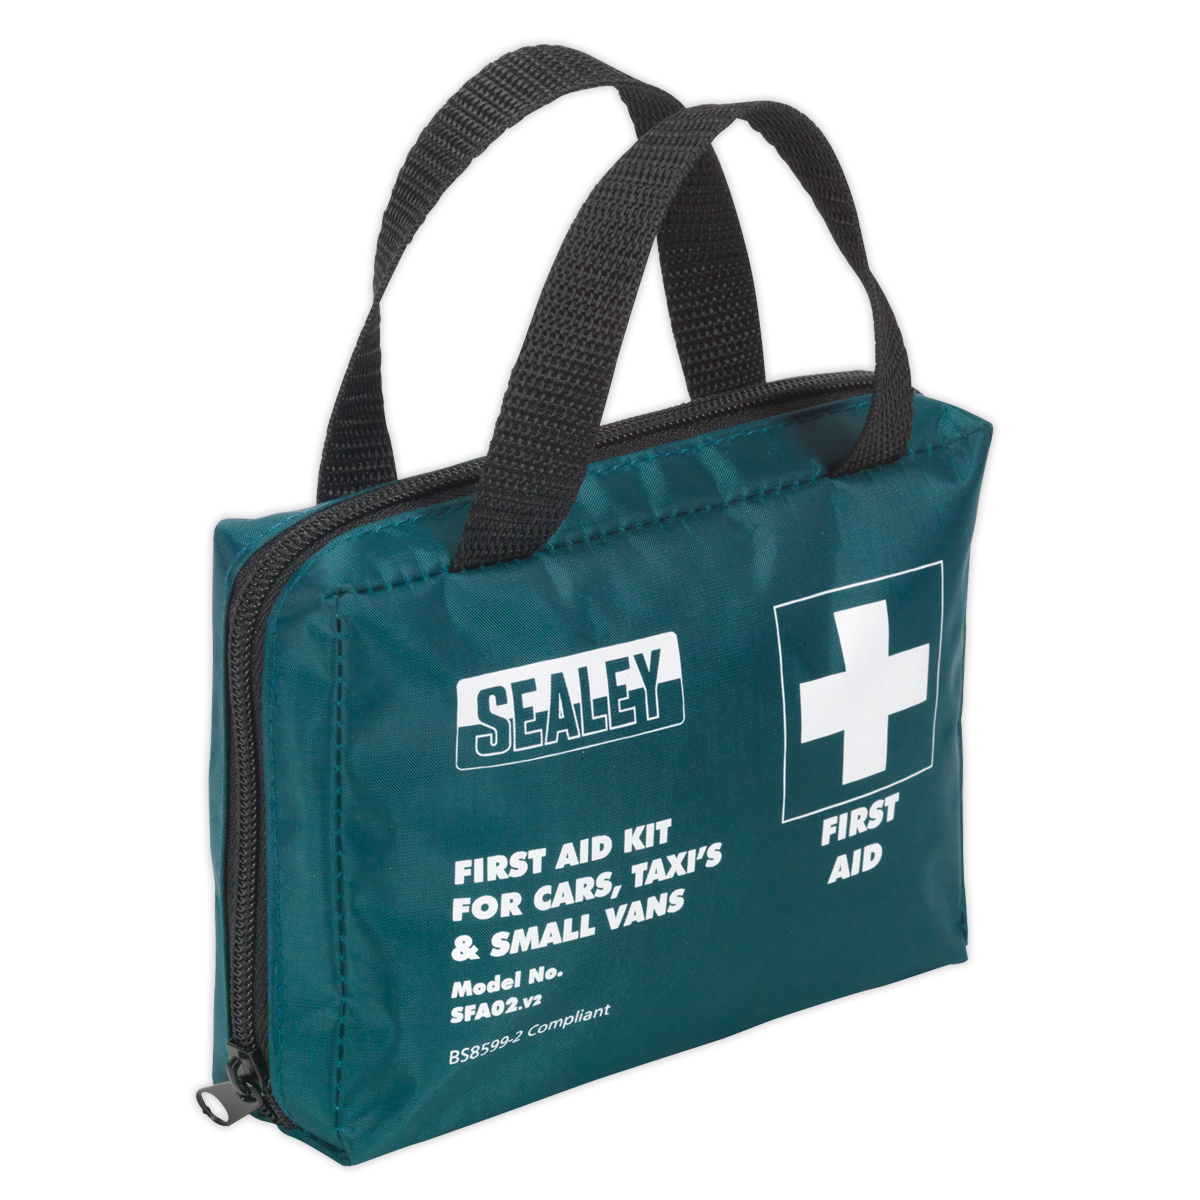 First Aid Kit Medium for Cars, Taxis & Small Vans - BS 8599-2 Compliant